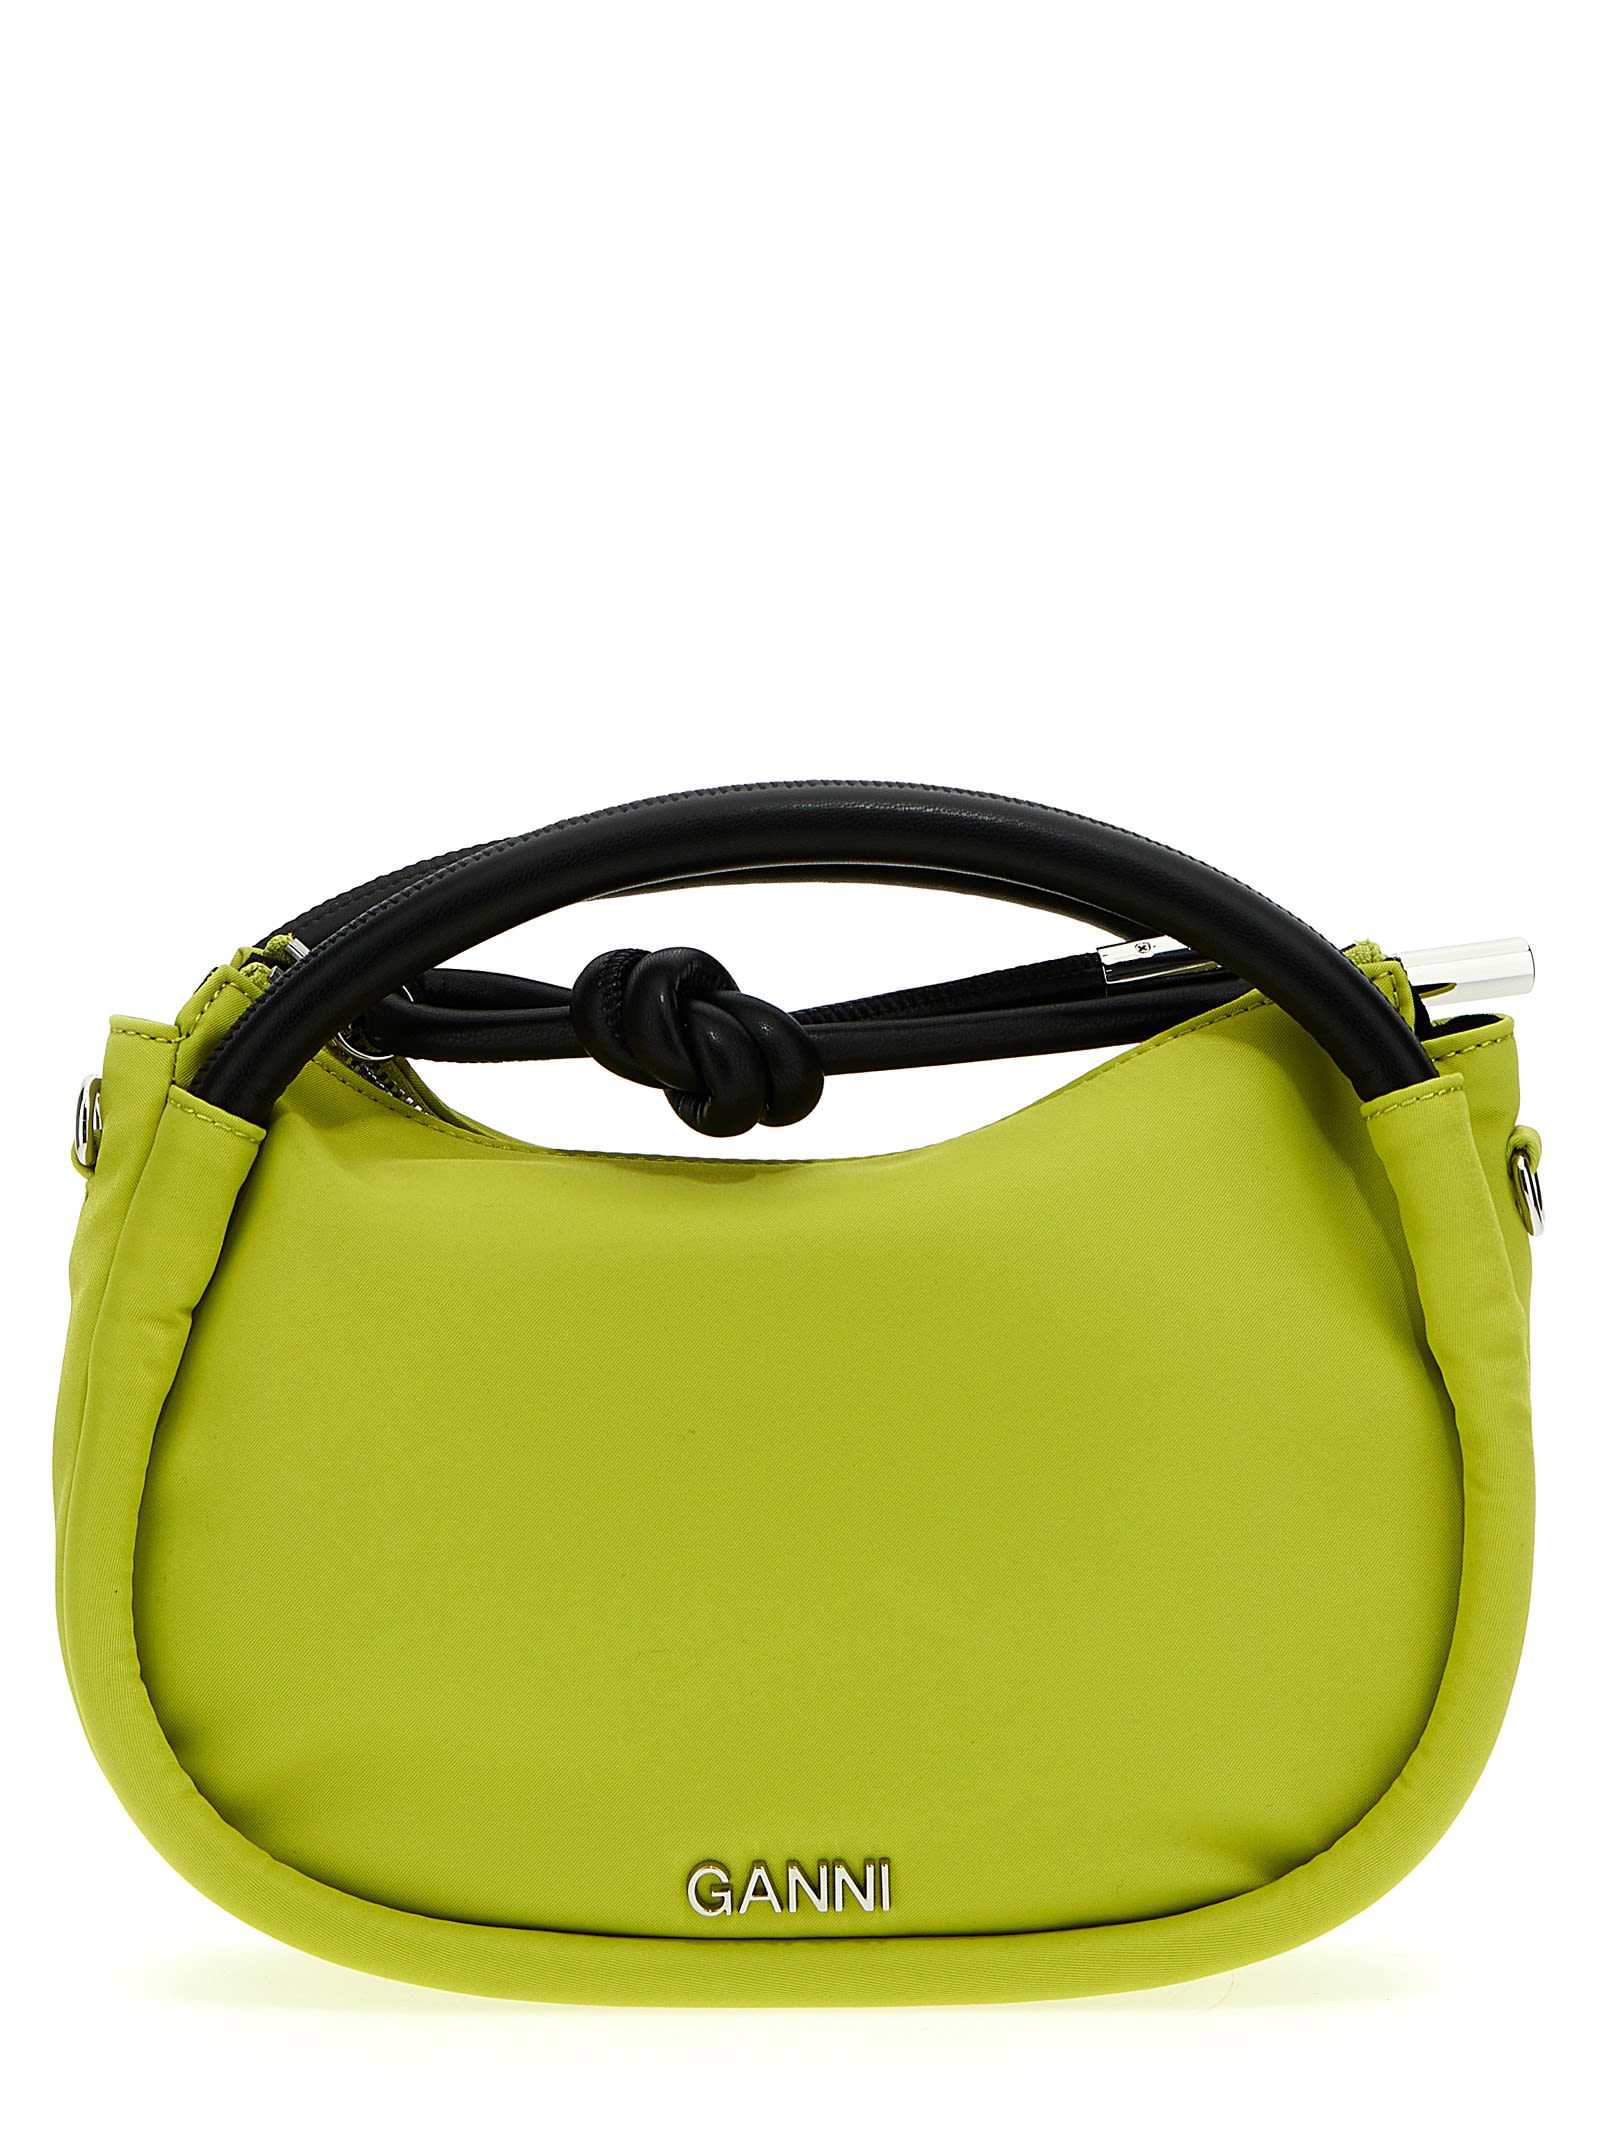 GANNI: The Knot bag in recycled nylon - Lime